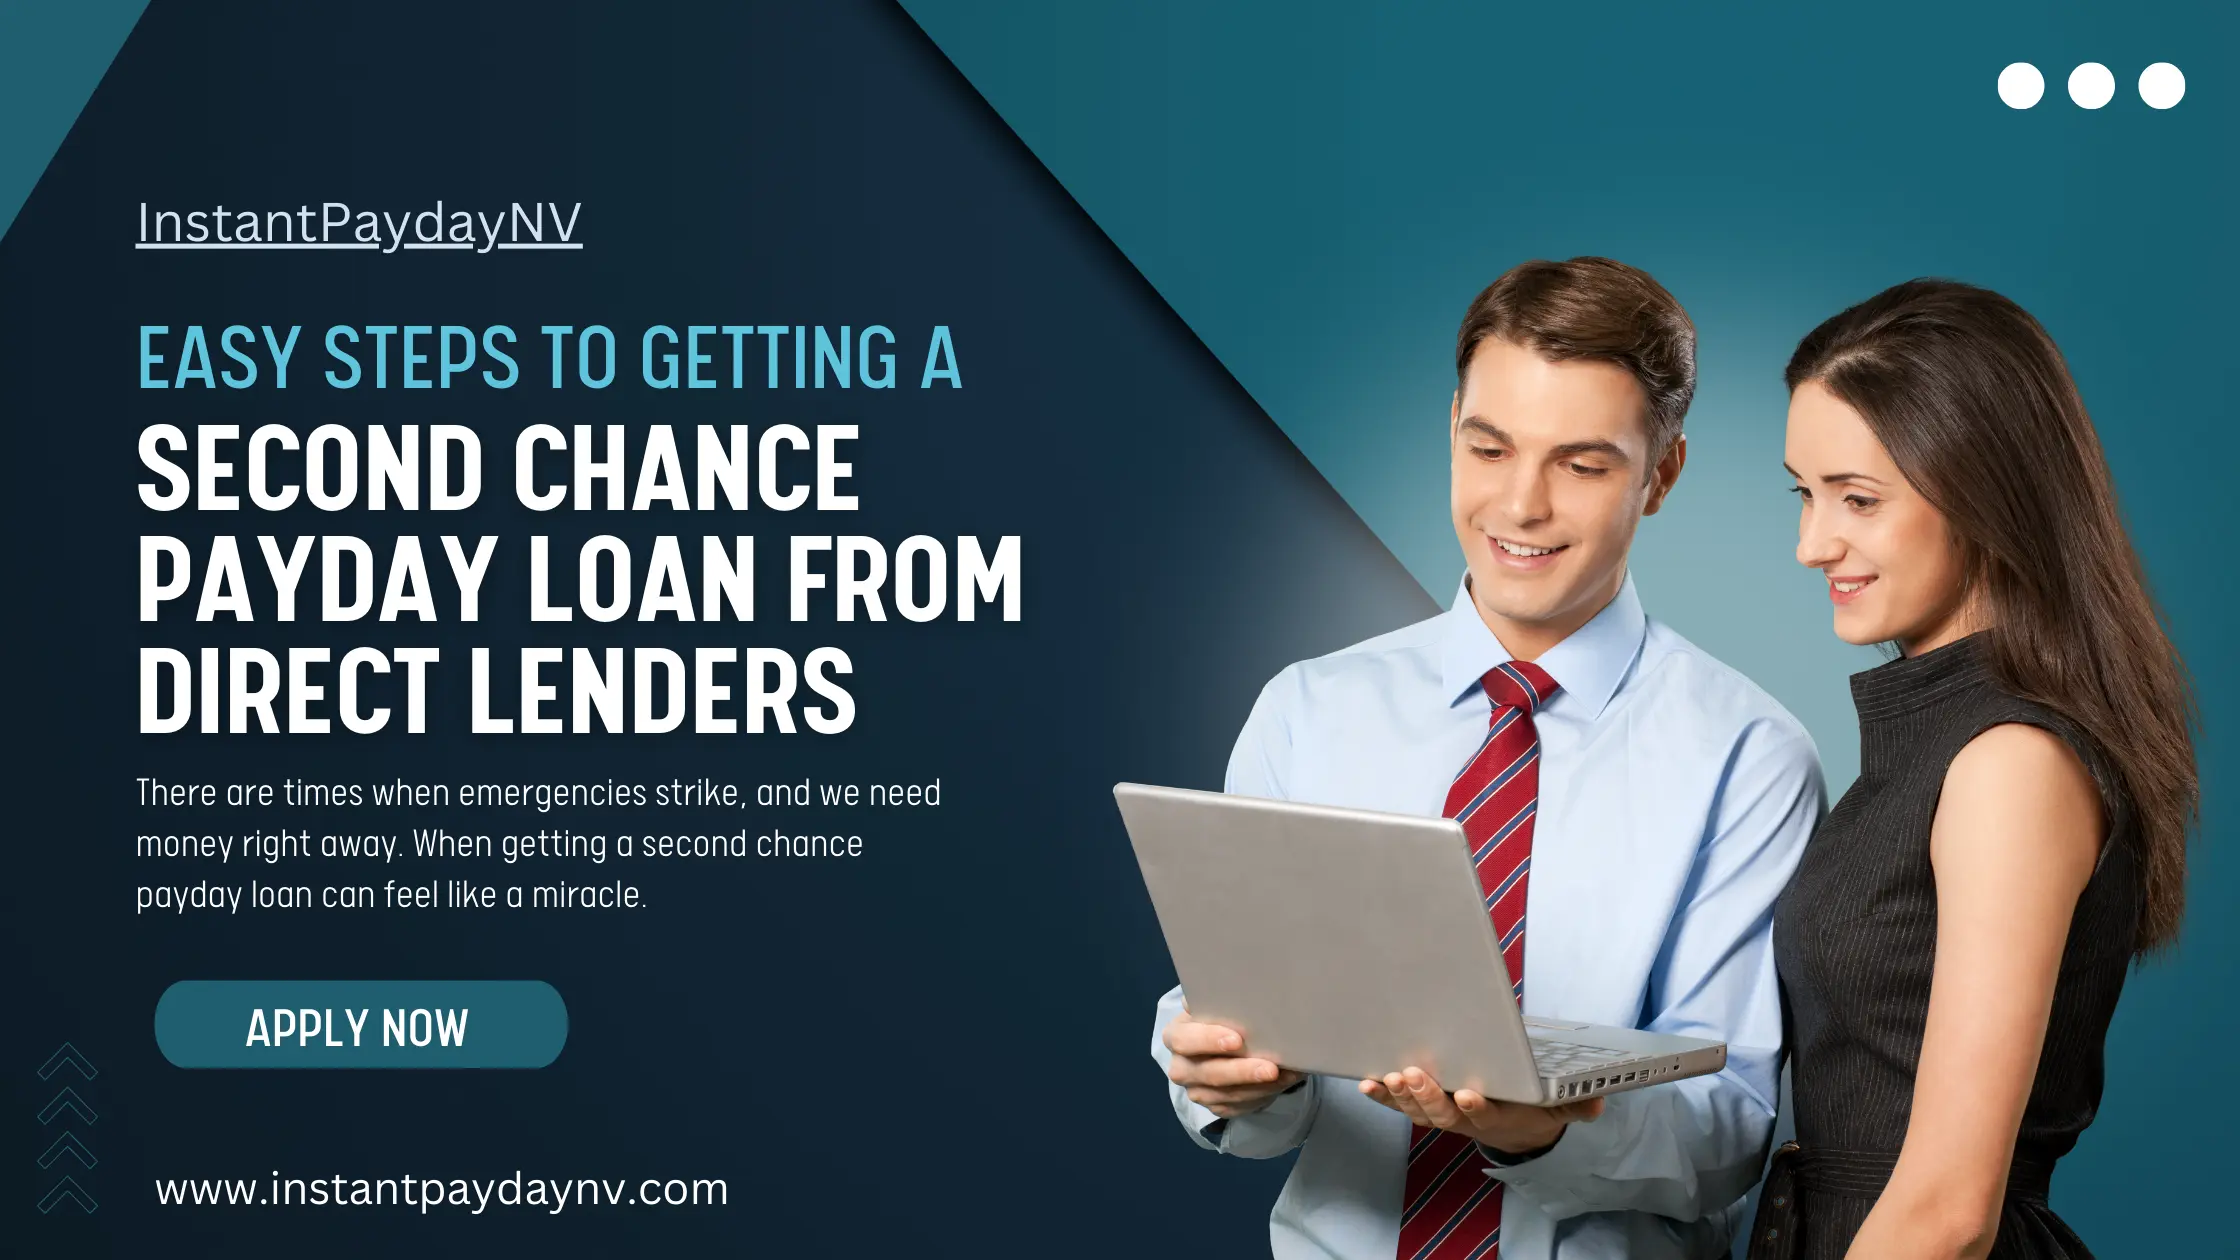 Easy Steps to Getting A Second Chance Payday Loan from Direct Lenders!